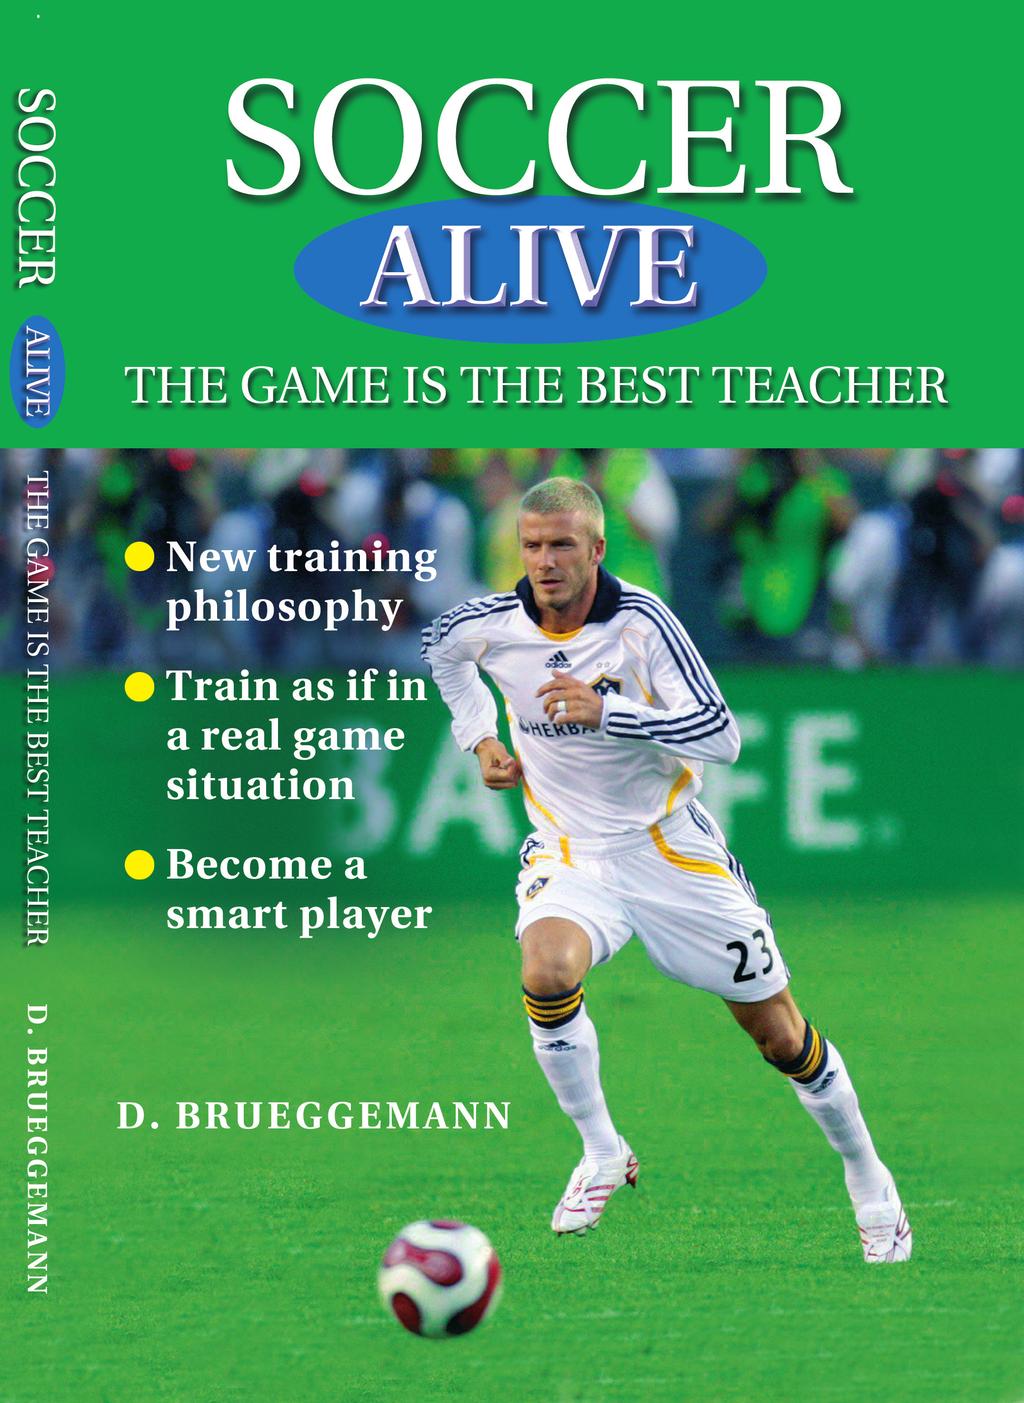 USSF A License Holder Sam Snow Director of Coaching Education US Youth Soccer SOCCER ALIVE FIFA and DFB Master Coach Detlev Brueggemann clearly and effectively demonstrates how to extract specific